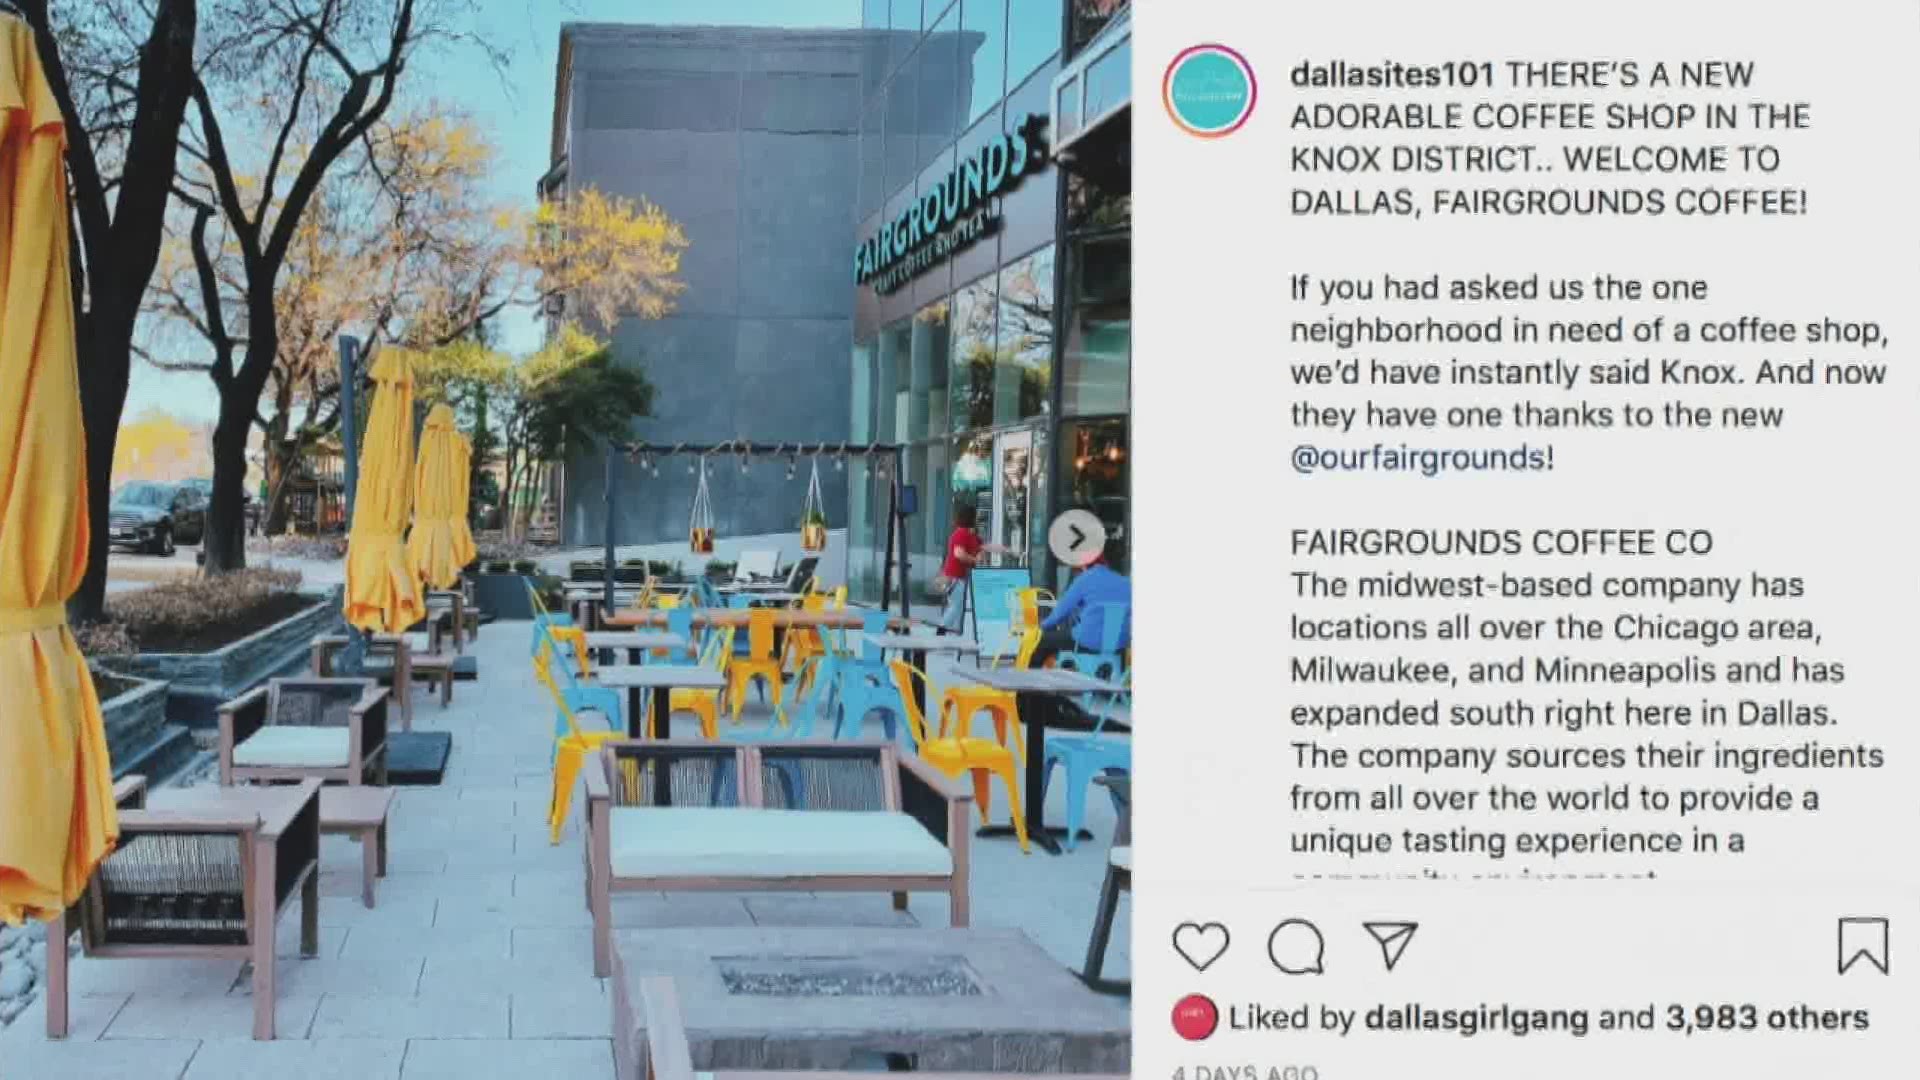 The brand has grown to have plenty of followers looking for the next Instagram-worthy spot in the city.